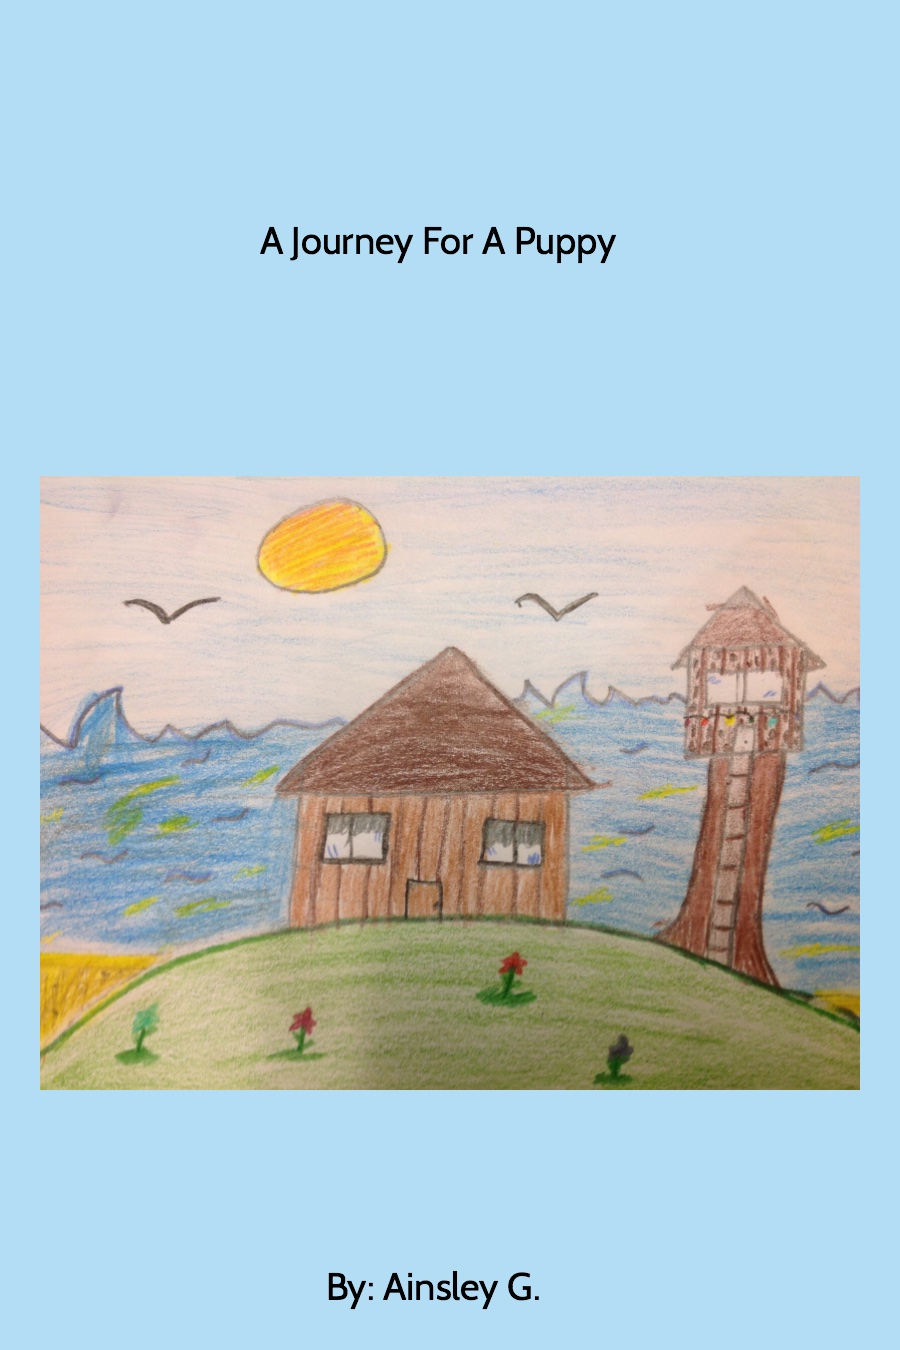 A Journey For A Puppy by Ainsley G